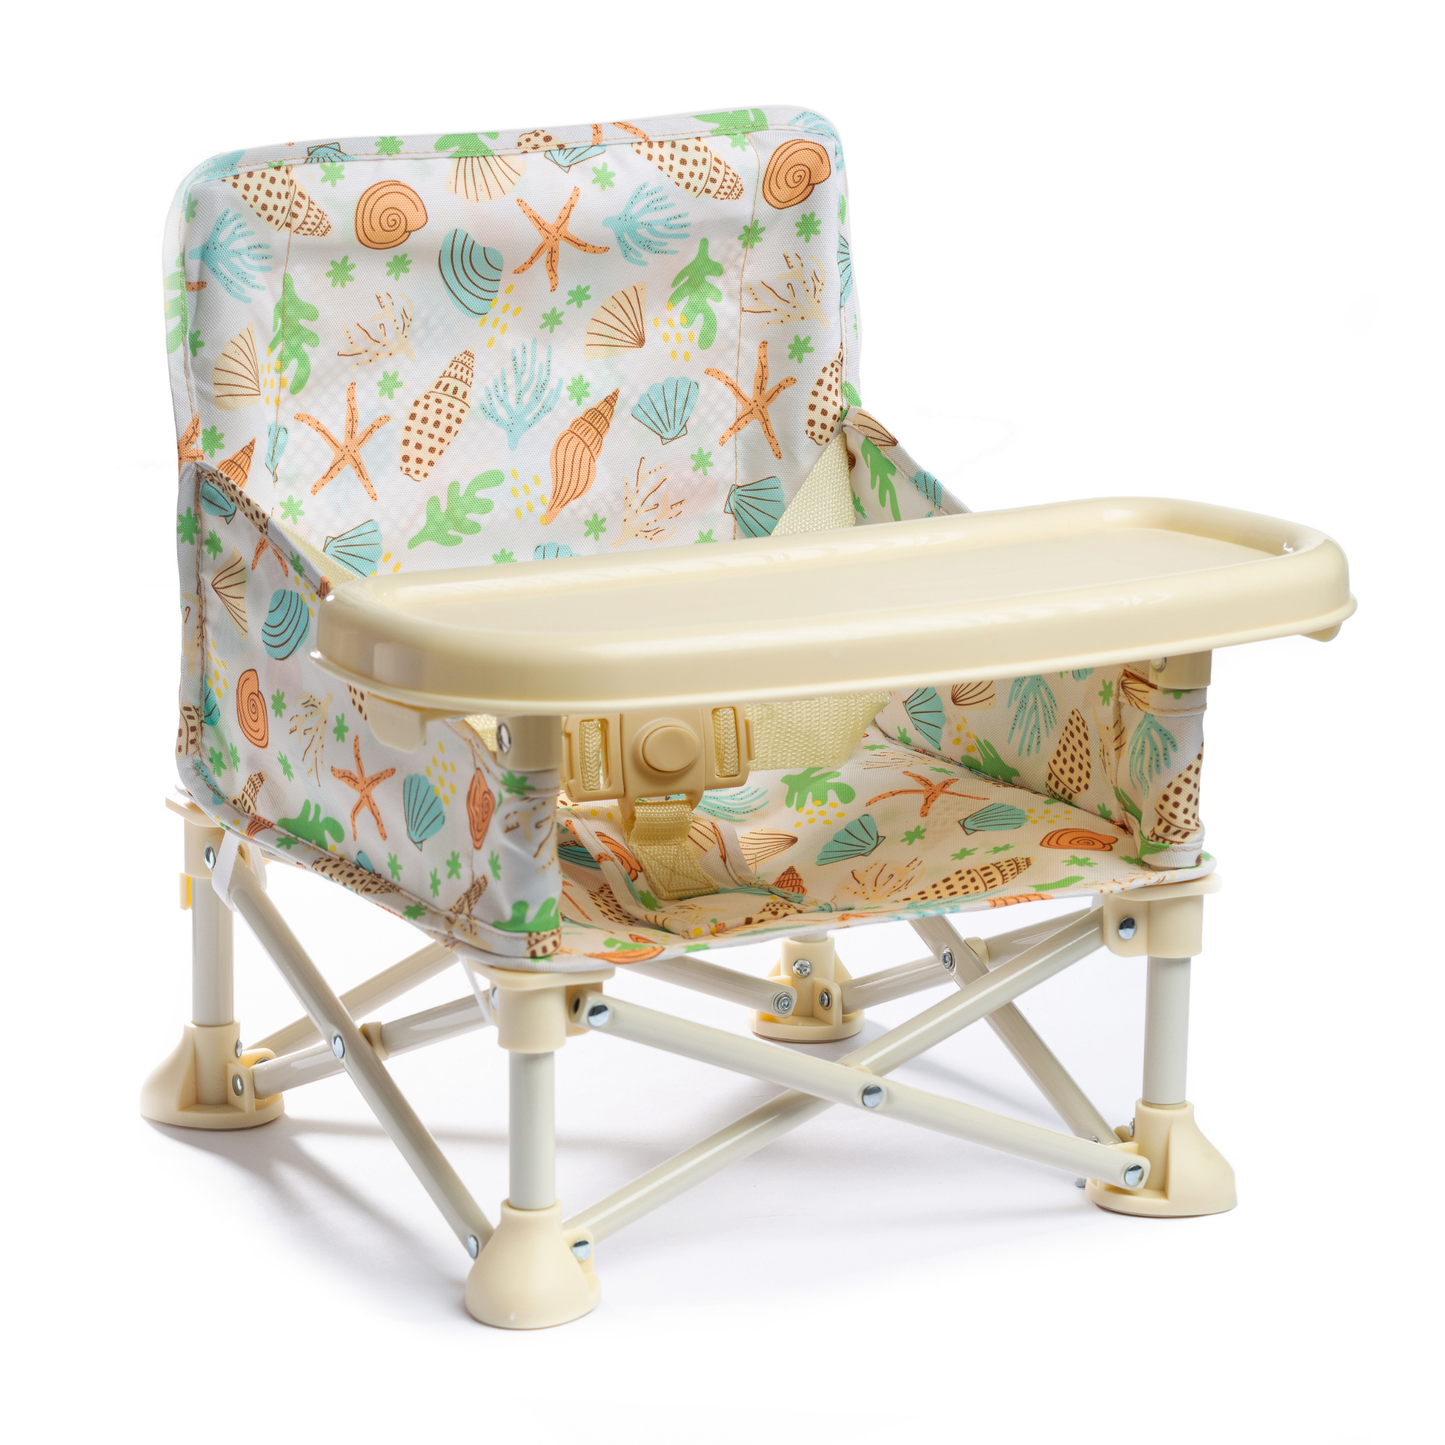 Sailor Shell Baby Chair